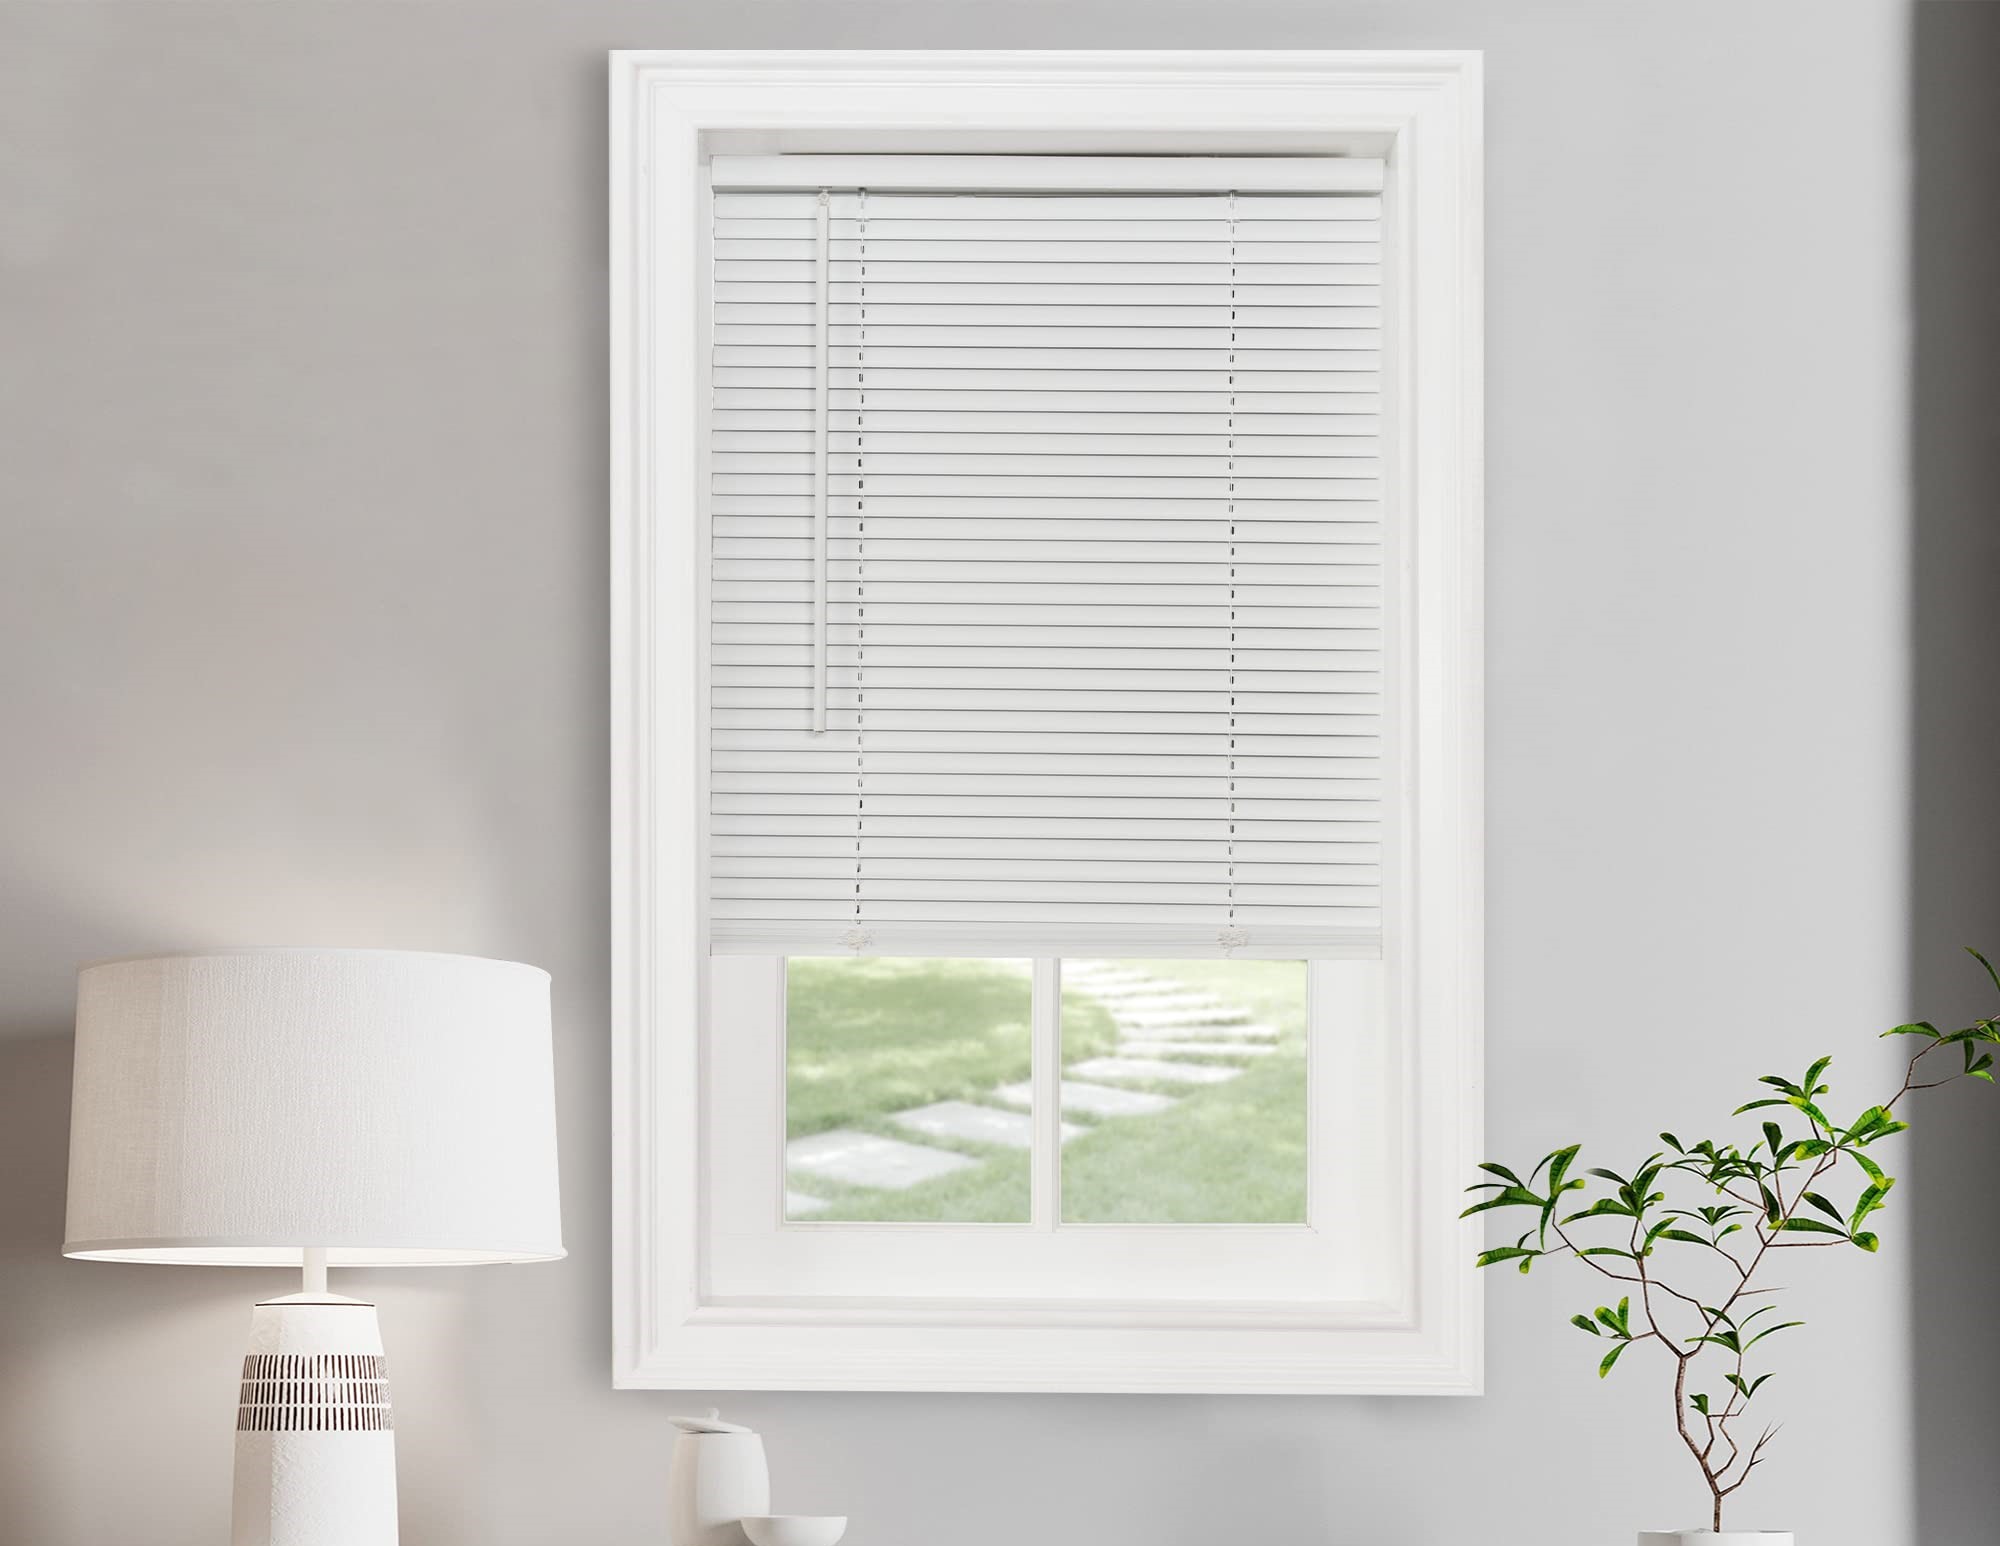 How To Lengthen Blinds